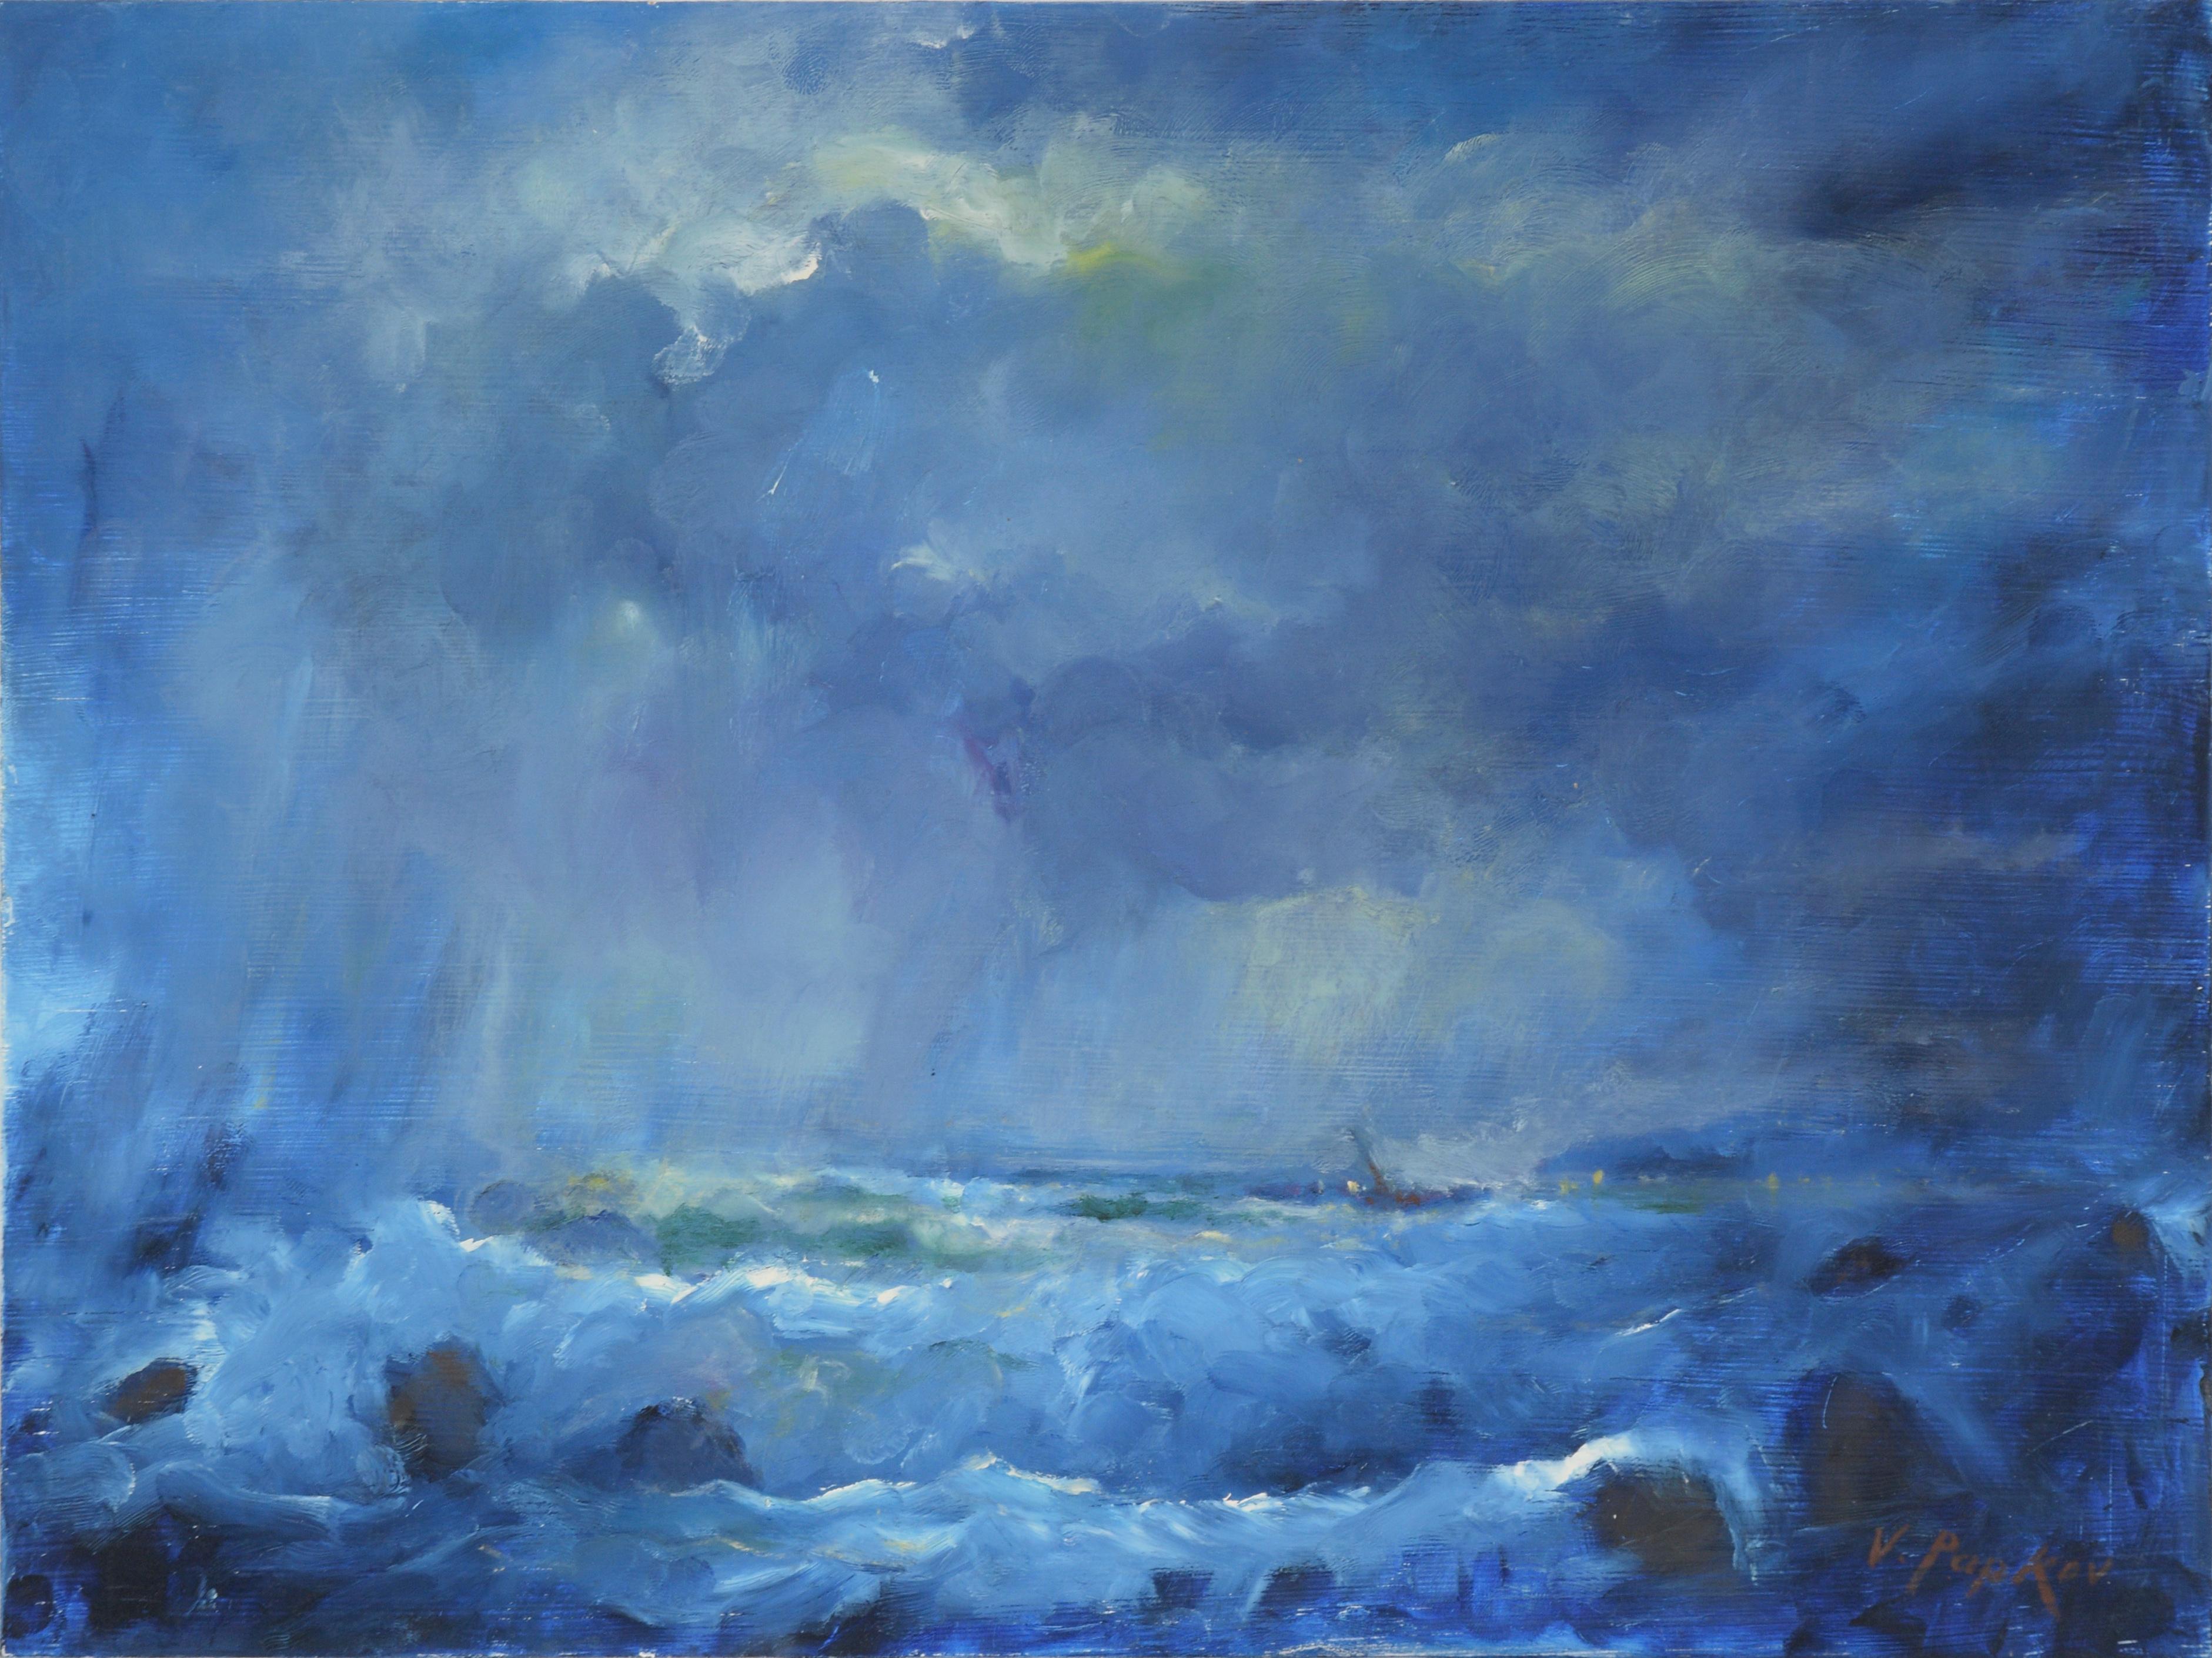 Vasil Papkov Landscape Painting - In the Eye of the Storm